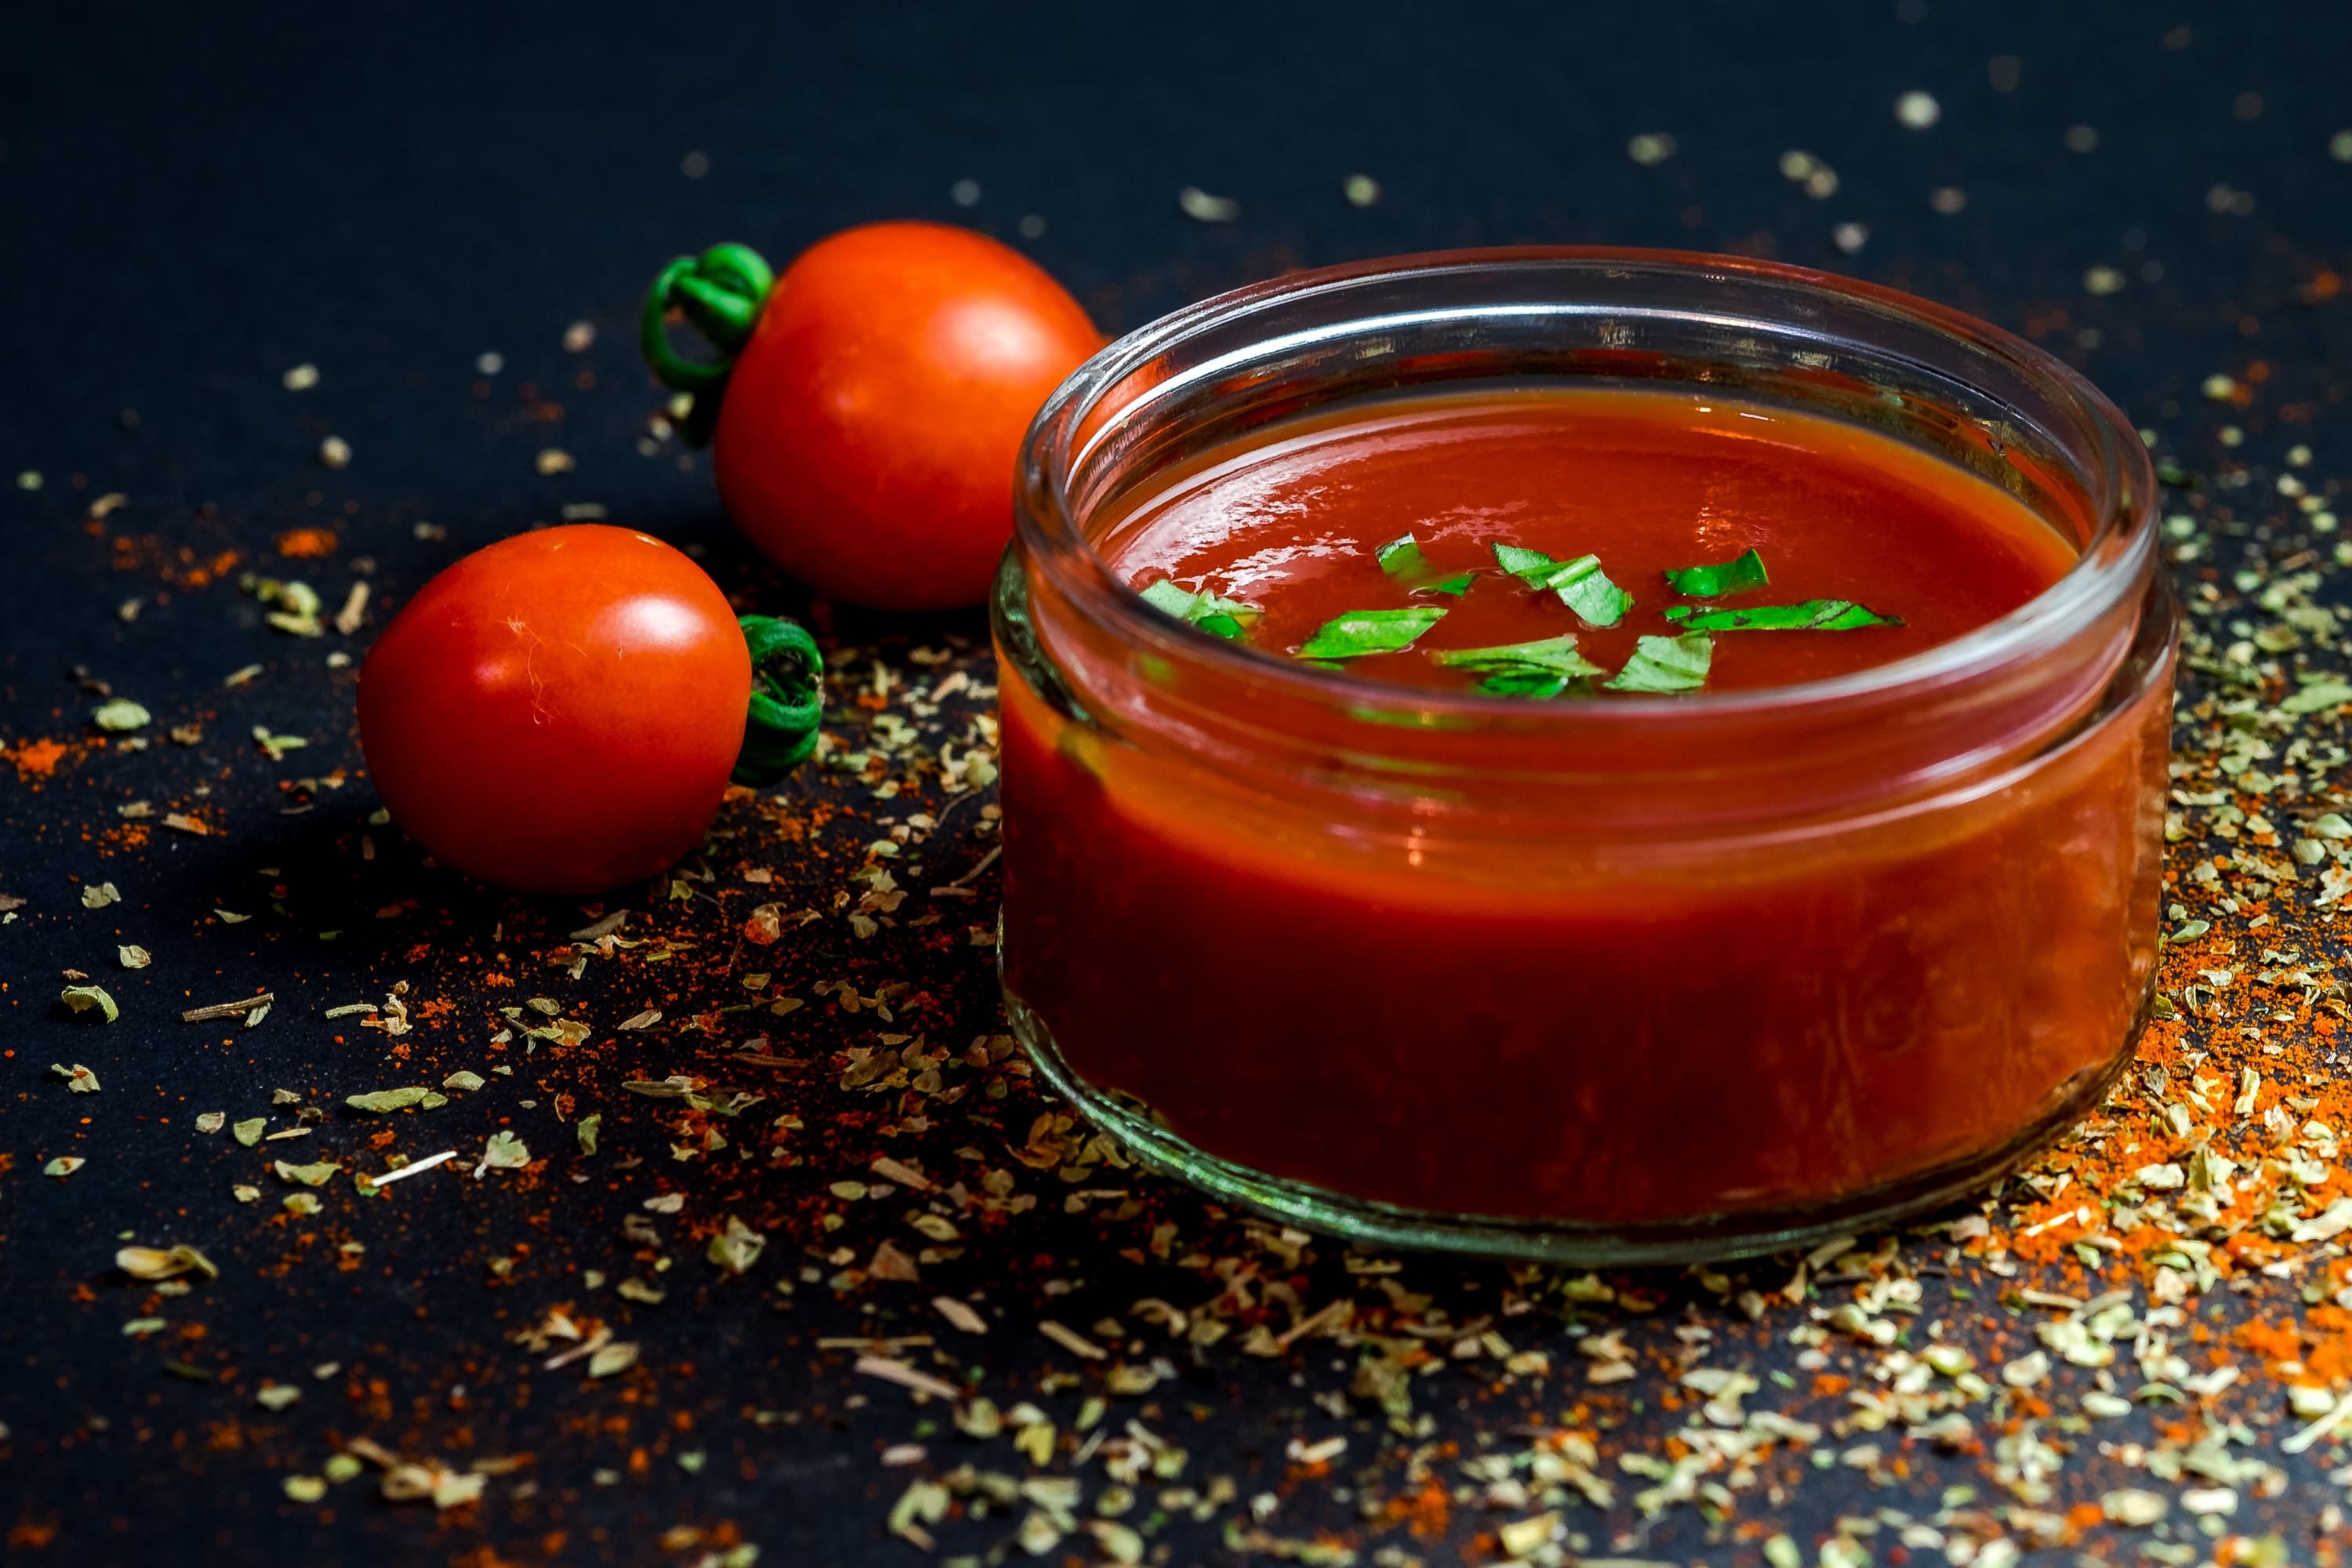 What Is This Sauce And How Can We Use It